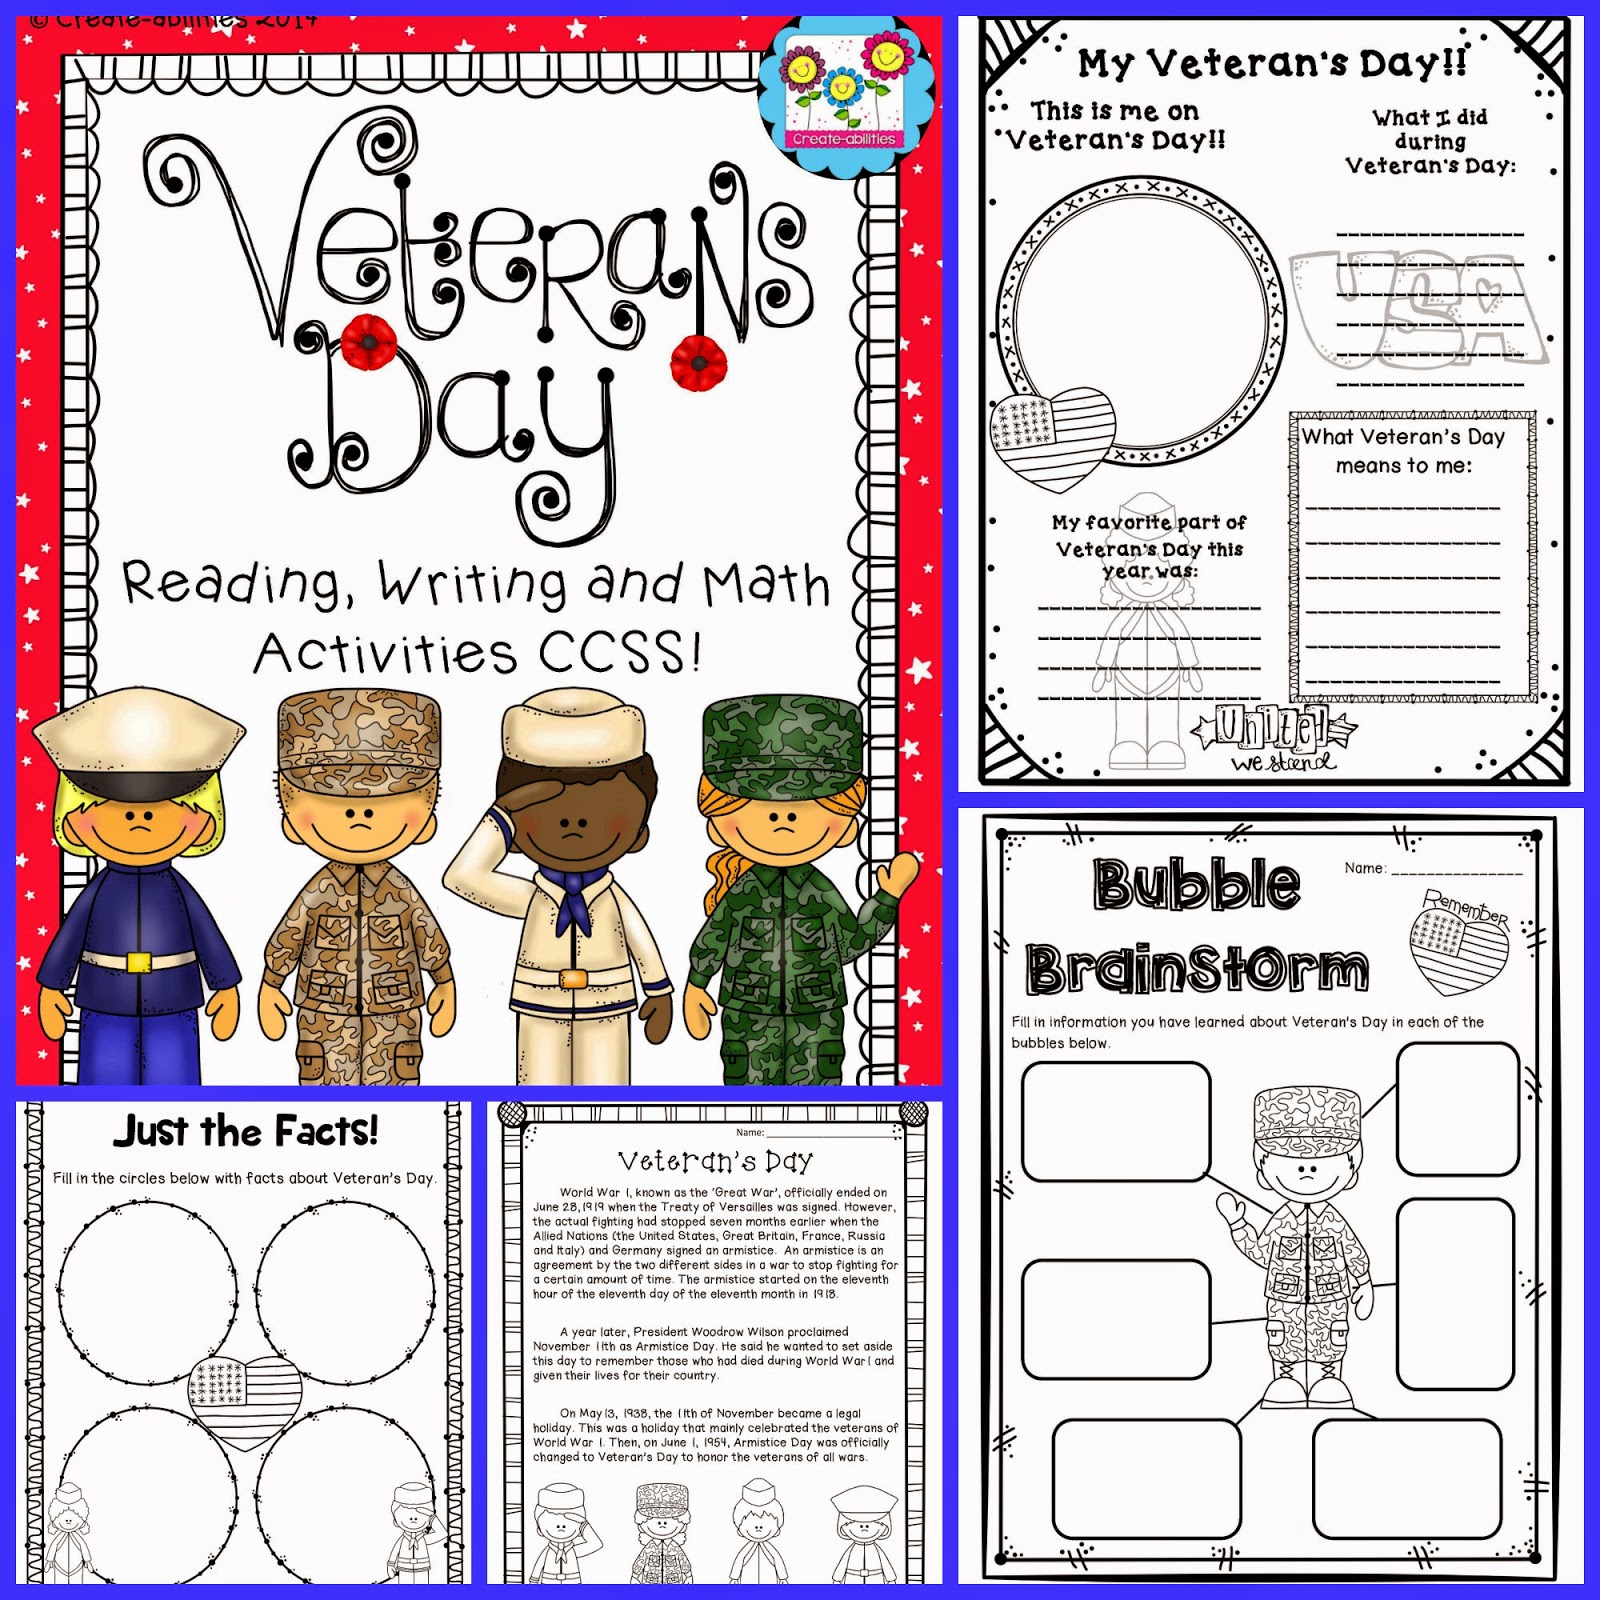 6-awesome-veterans-day-activities-create-abilities